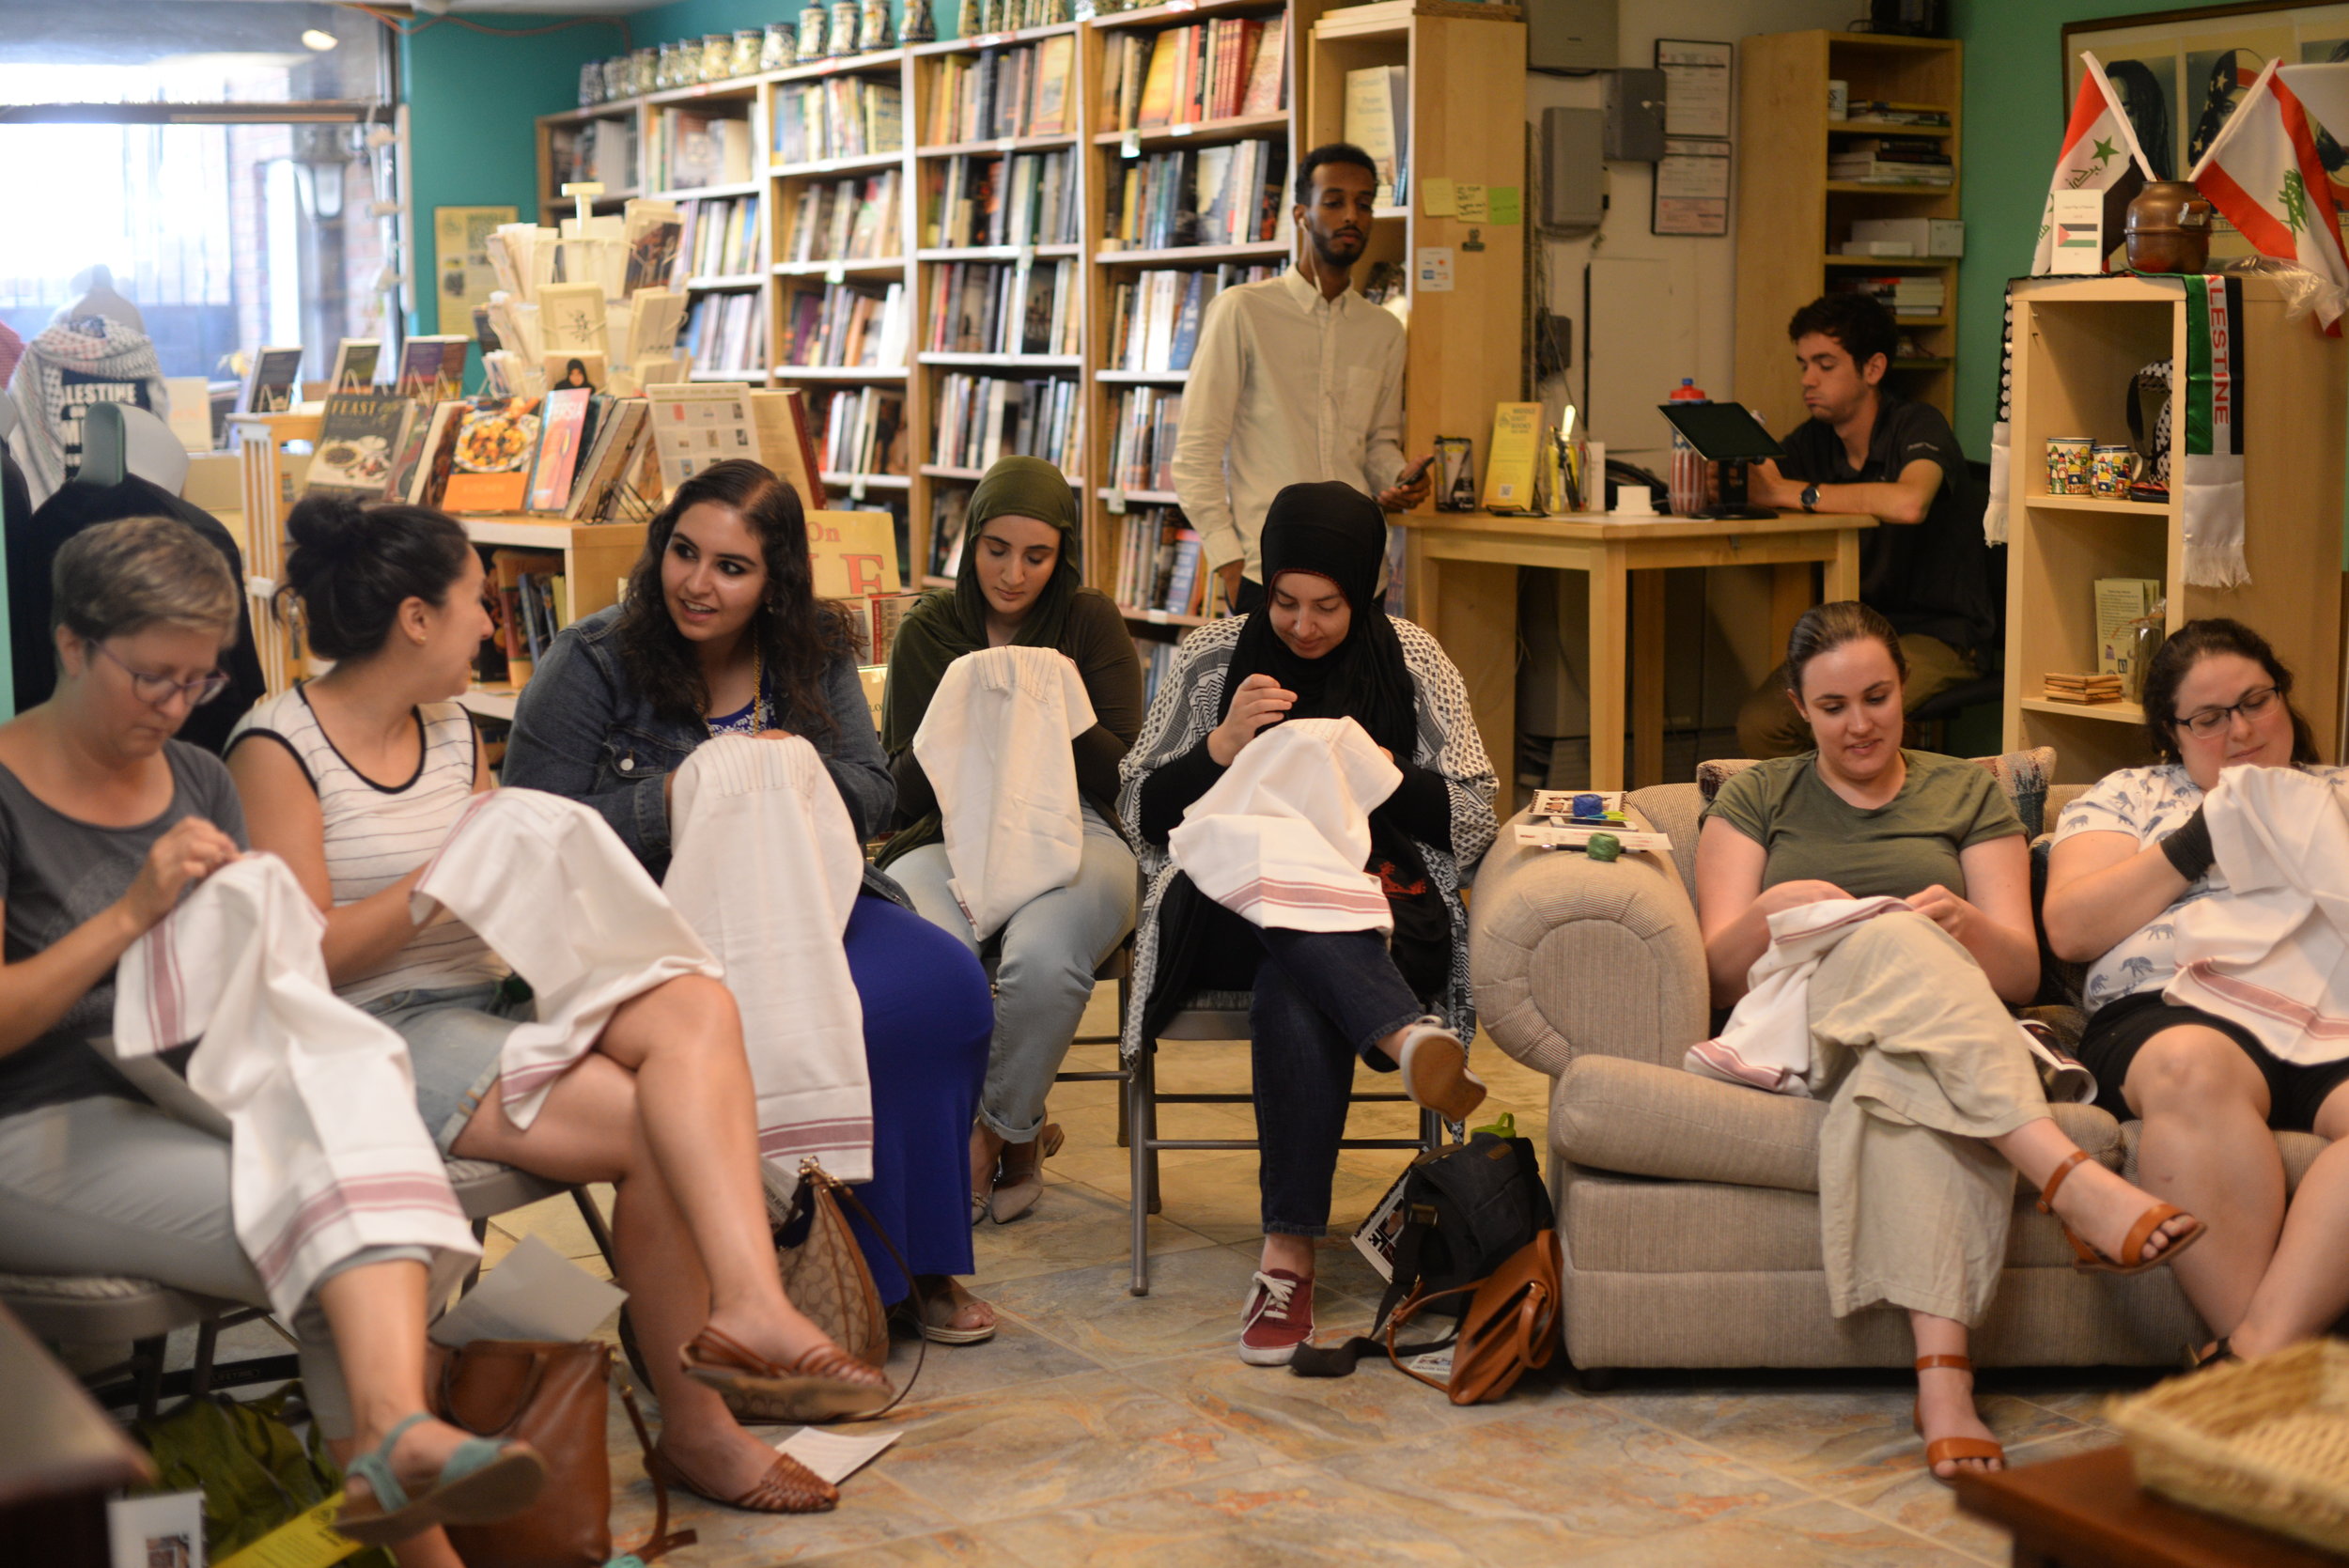  DC Book Launch at Middle East Books and More  Print Edition  Washington, DC  July 2018  Photograph by AnaMichele Babyak 